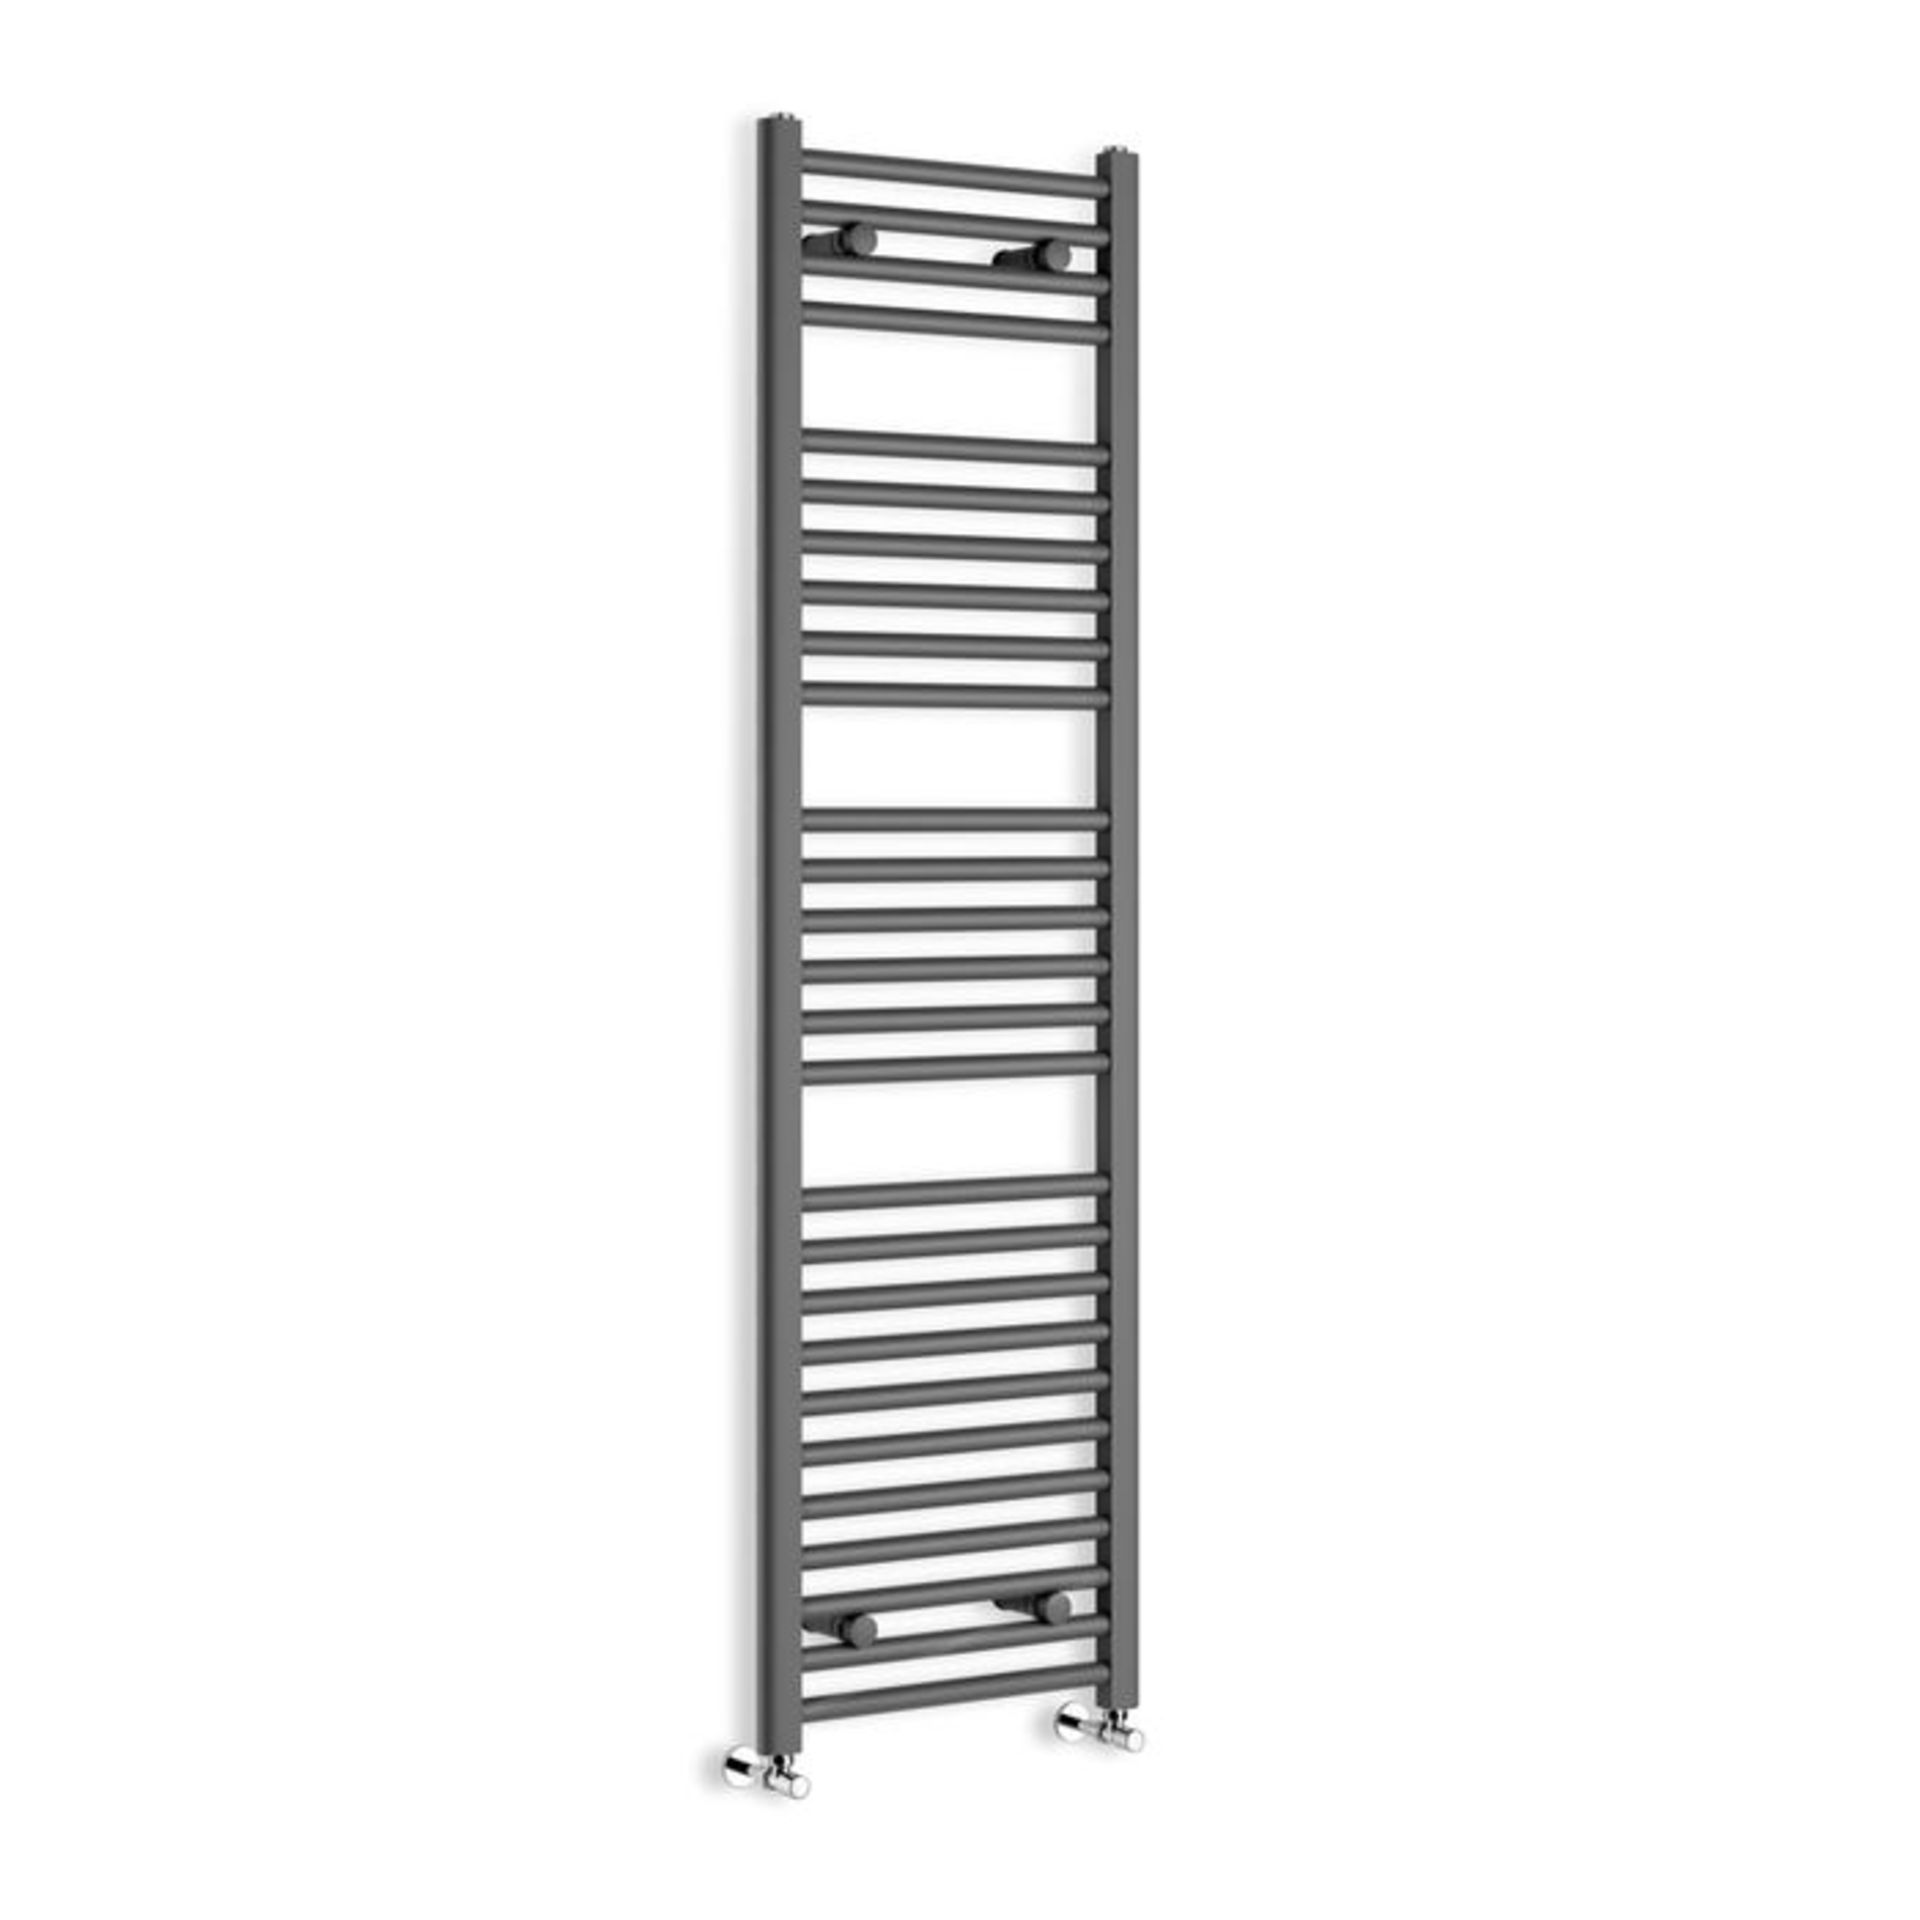 (TP204) 1600x450mm - 25mm Tubes - Anthracite Heated Straight Rail Ladder Towel Radiator. RRP £362. - Image 3 of 3